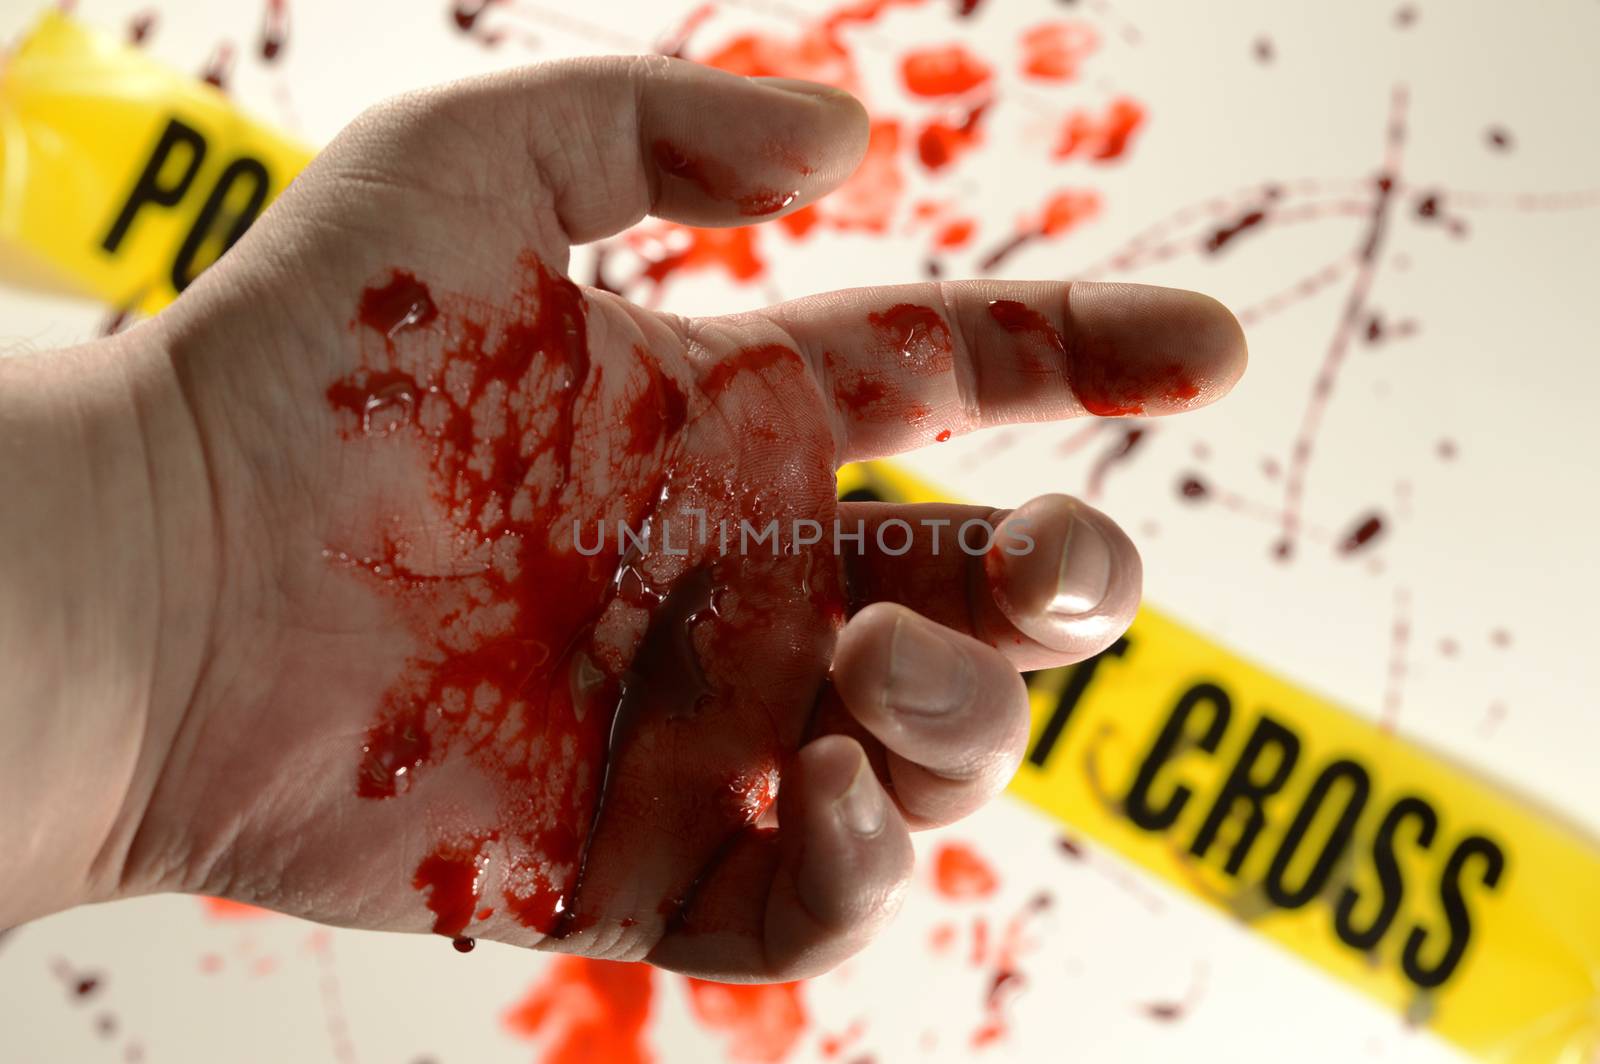 Victim at Crime Scene by AlphaBaby